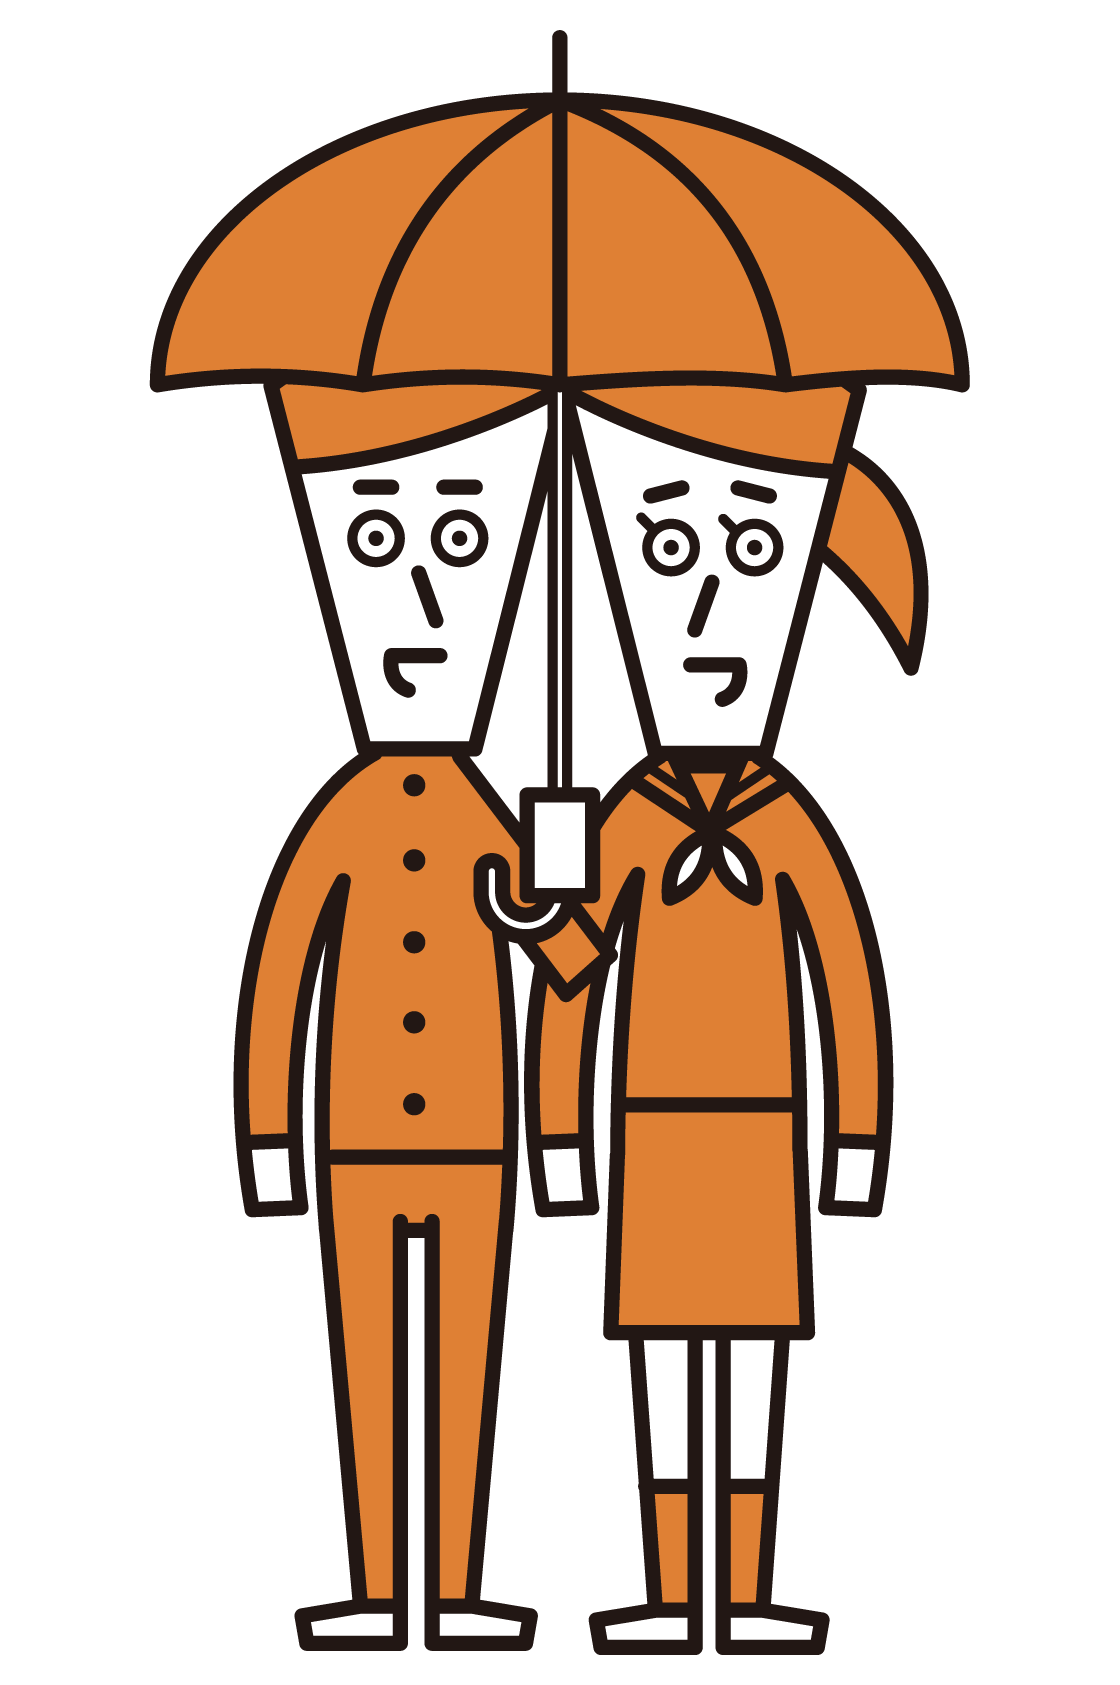 This is an illustration of a high school and junior high school student couple holding an umbrella.